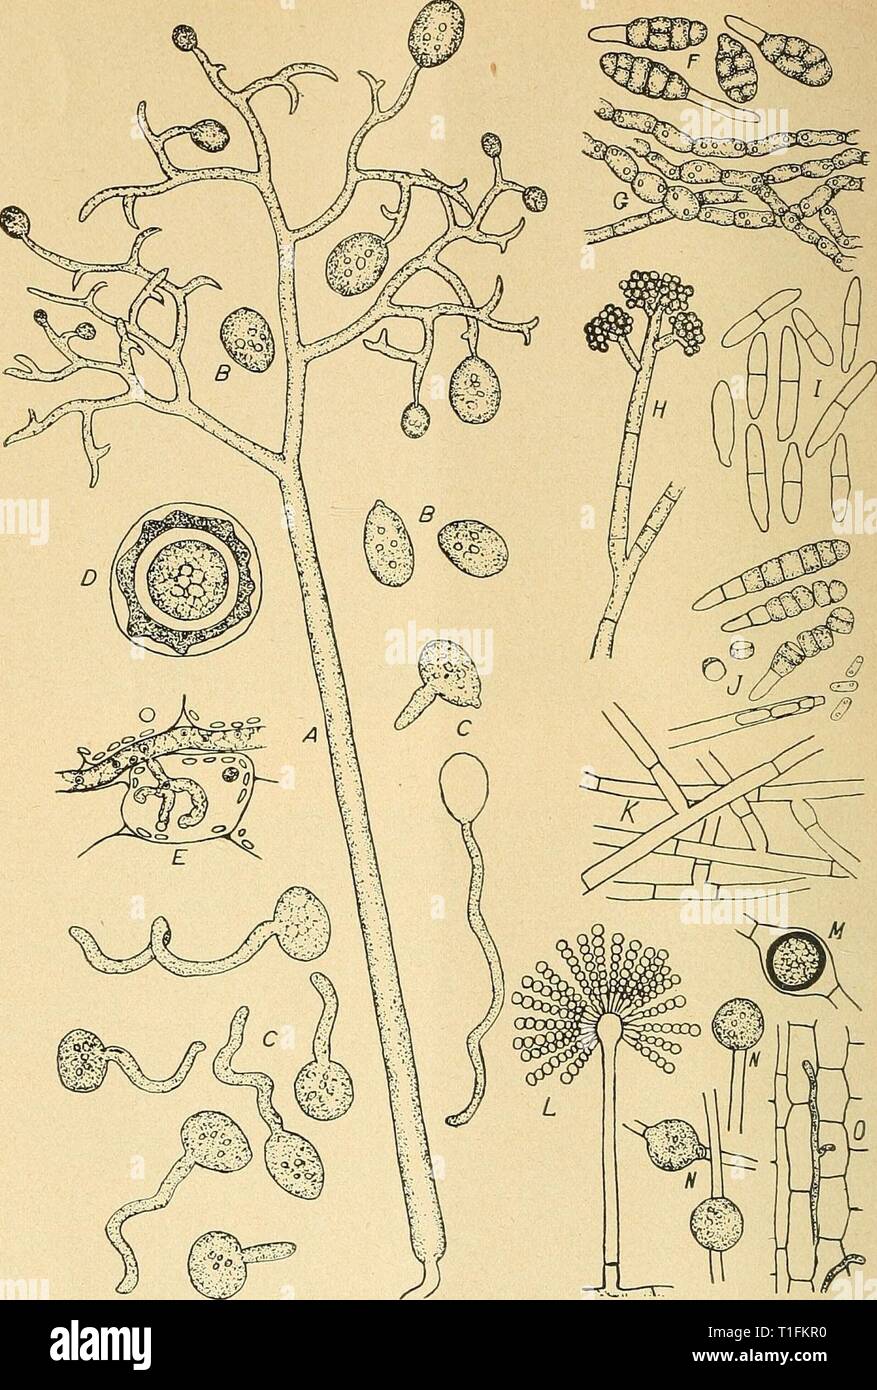 Diseases and decays of Connecticut Diseases and decays of Connecticut tobacco  diseasesdecaysof00ande Year: 1940  Figure 2. Some fungi that cause tobacco diseeises, all greatly magnified. A-E, the mildew fungus Peronospora tahacina. A, Sporophore with developing summer spores at tips. B, Mature summer spores. C, Germination of the summer spores. D, Cross- section of a winter spore. E, Haustorium inside a leaf cell and a segment of mycelium between the leaf cells. F, Spores of the fungus Aliernaria tenuis, causing brown-spot and freckle rot. G, Mycelium of the same fungus. H, Sporophore and hea Stock Photo